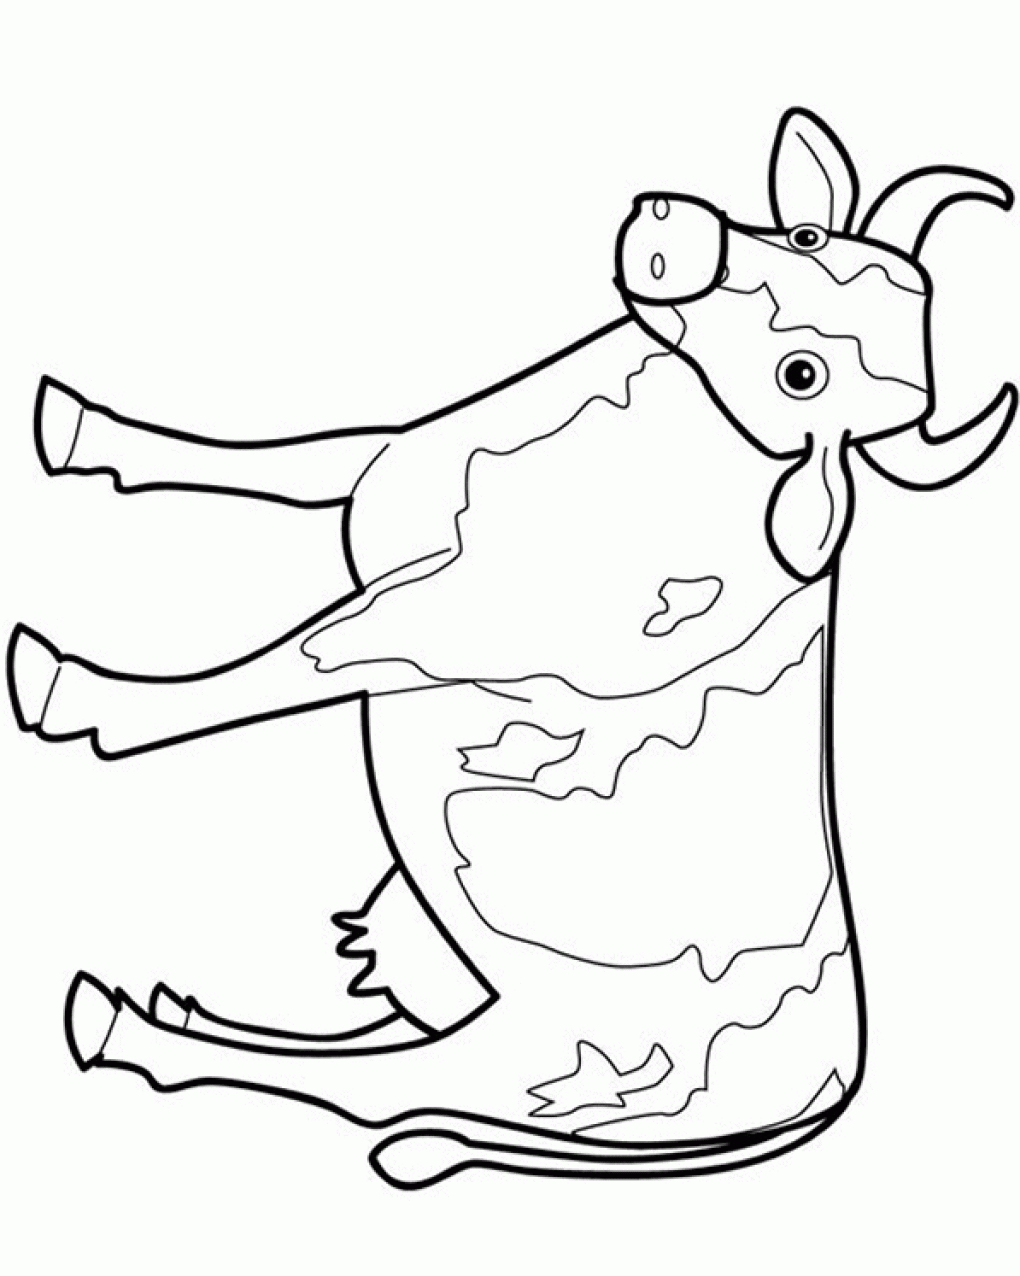 cow coloring page full cow coloring pages | Printable Coloring